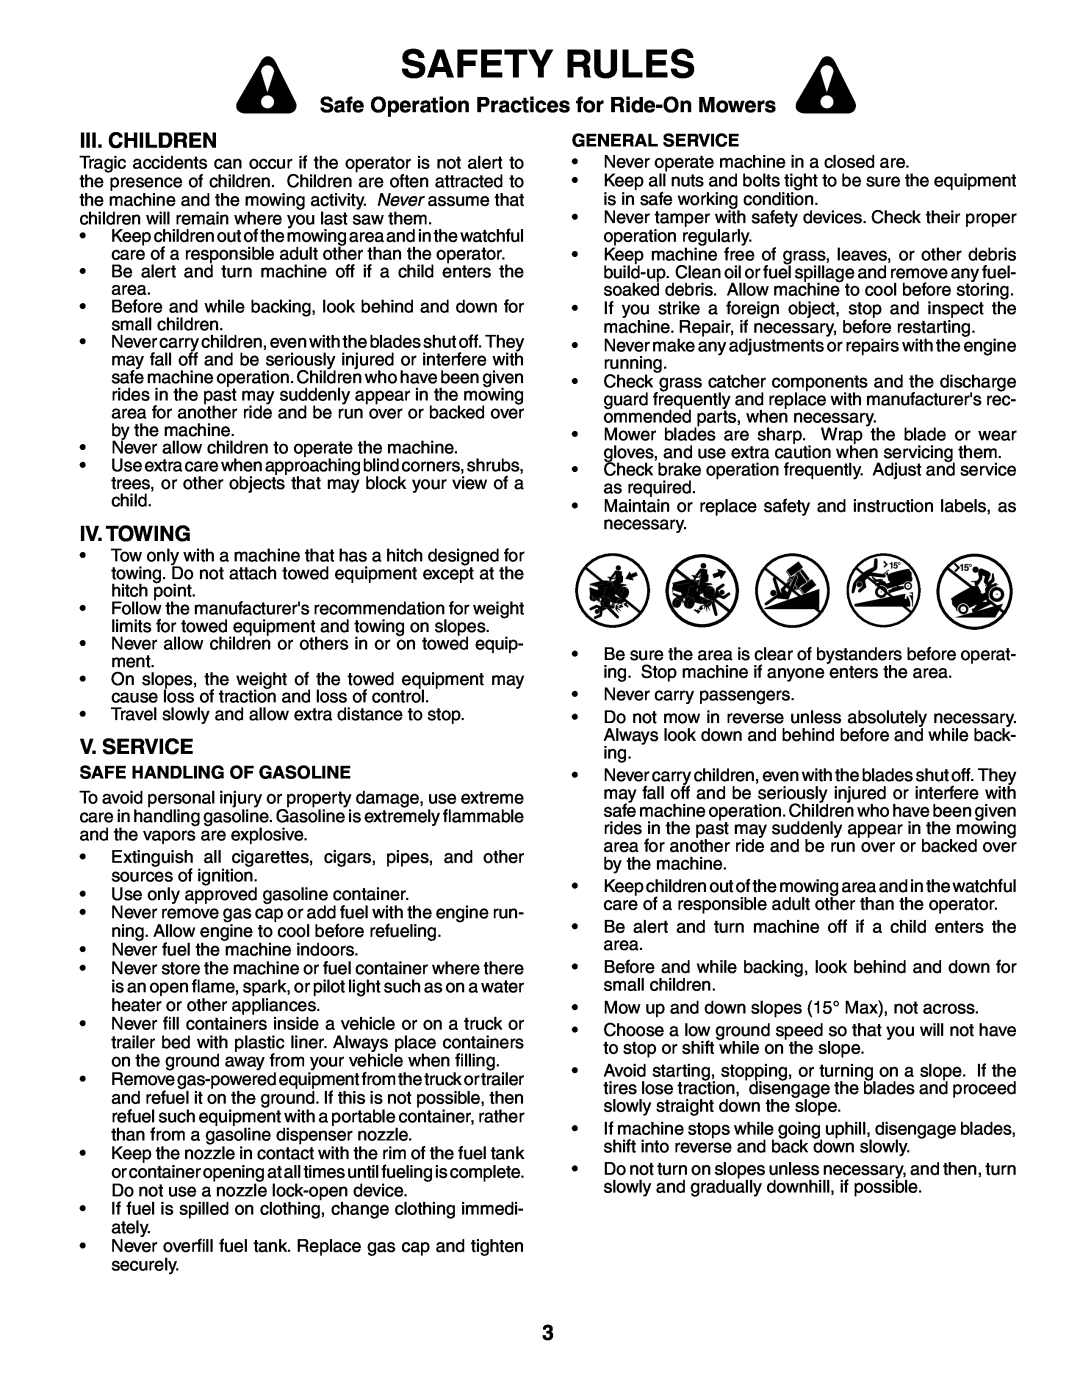 Poulan 195506 manual Iii. Children, Iv. Towing, V. Service, Safety Rules, Safe Operation Practices for Ride-OnMowers 